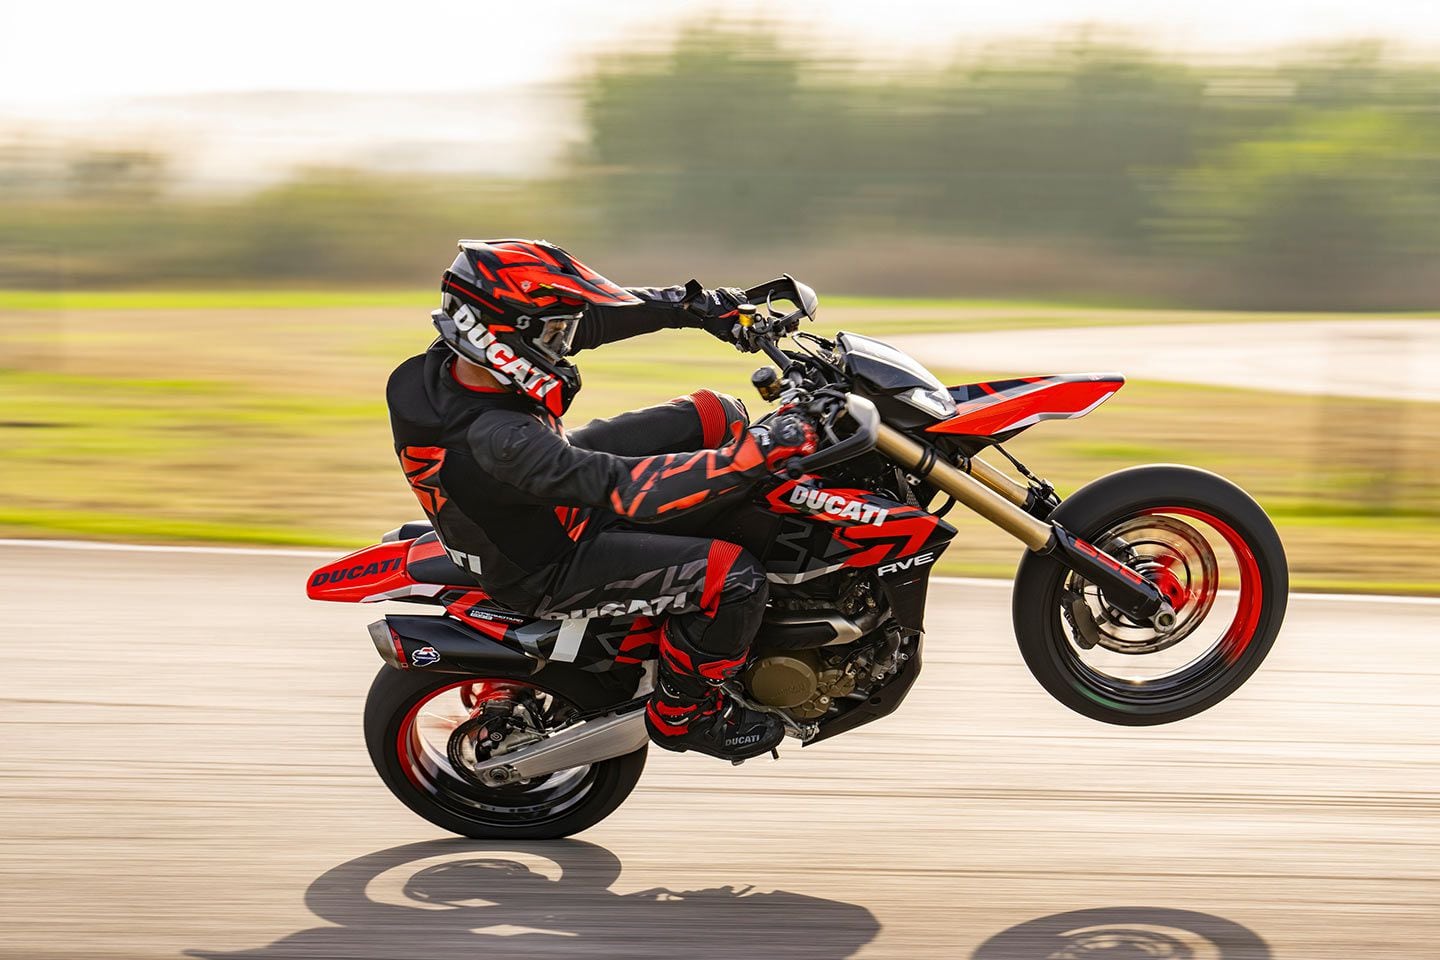 Ducati’s Hypermotard 698 Mono promises high-performance supermotard action with 77 hp from its Superquadro Mono single-cylinder engine.